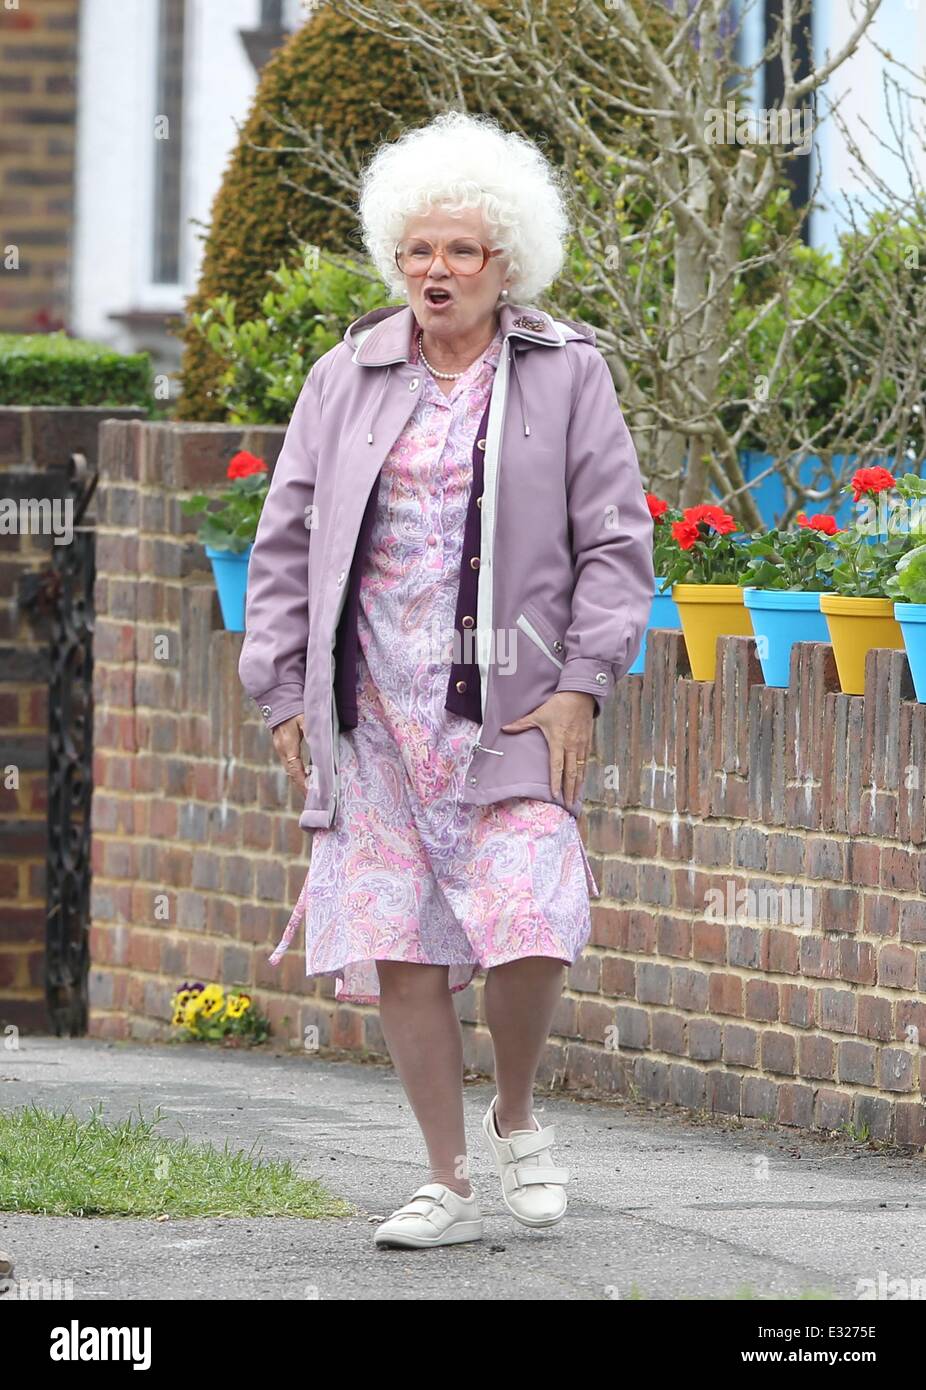 Actress Julie Walters joins Harry Hill in his new film 'The Harry Hill Movie'. The pair were filming at the house of Nana, Walters' character, and were joined by their pet hamster Abu  Featuring: Julie walters Where: London, United Kingdom When: 17 May 20 Stock Photo